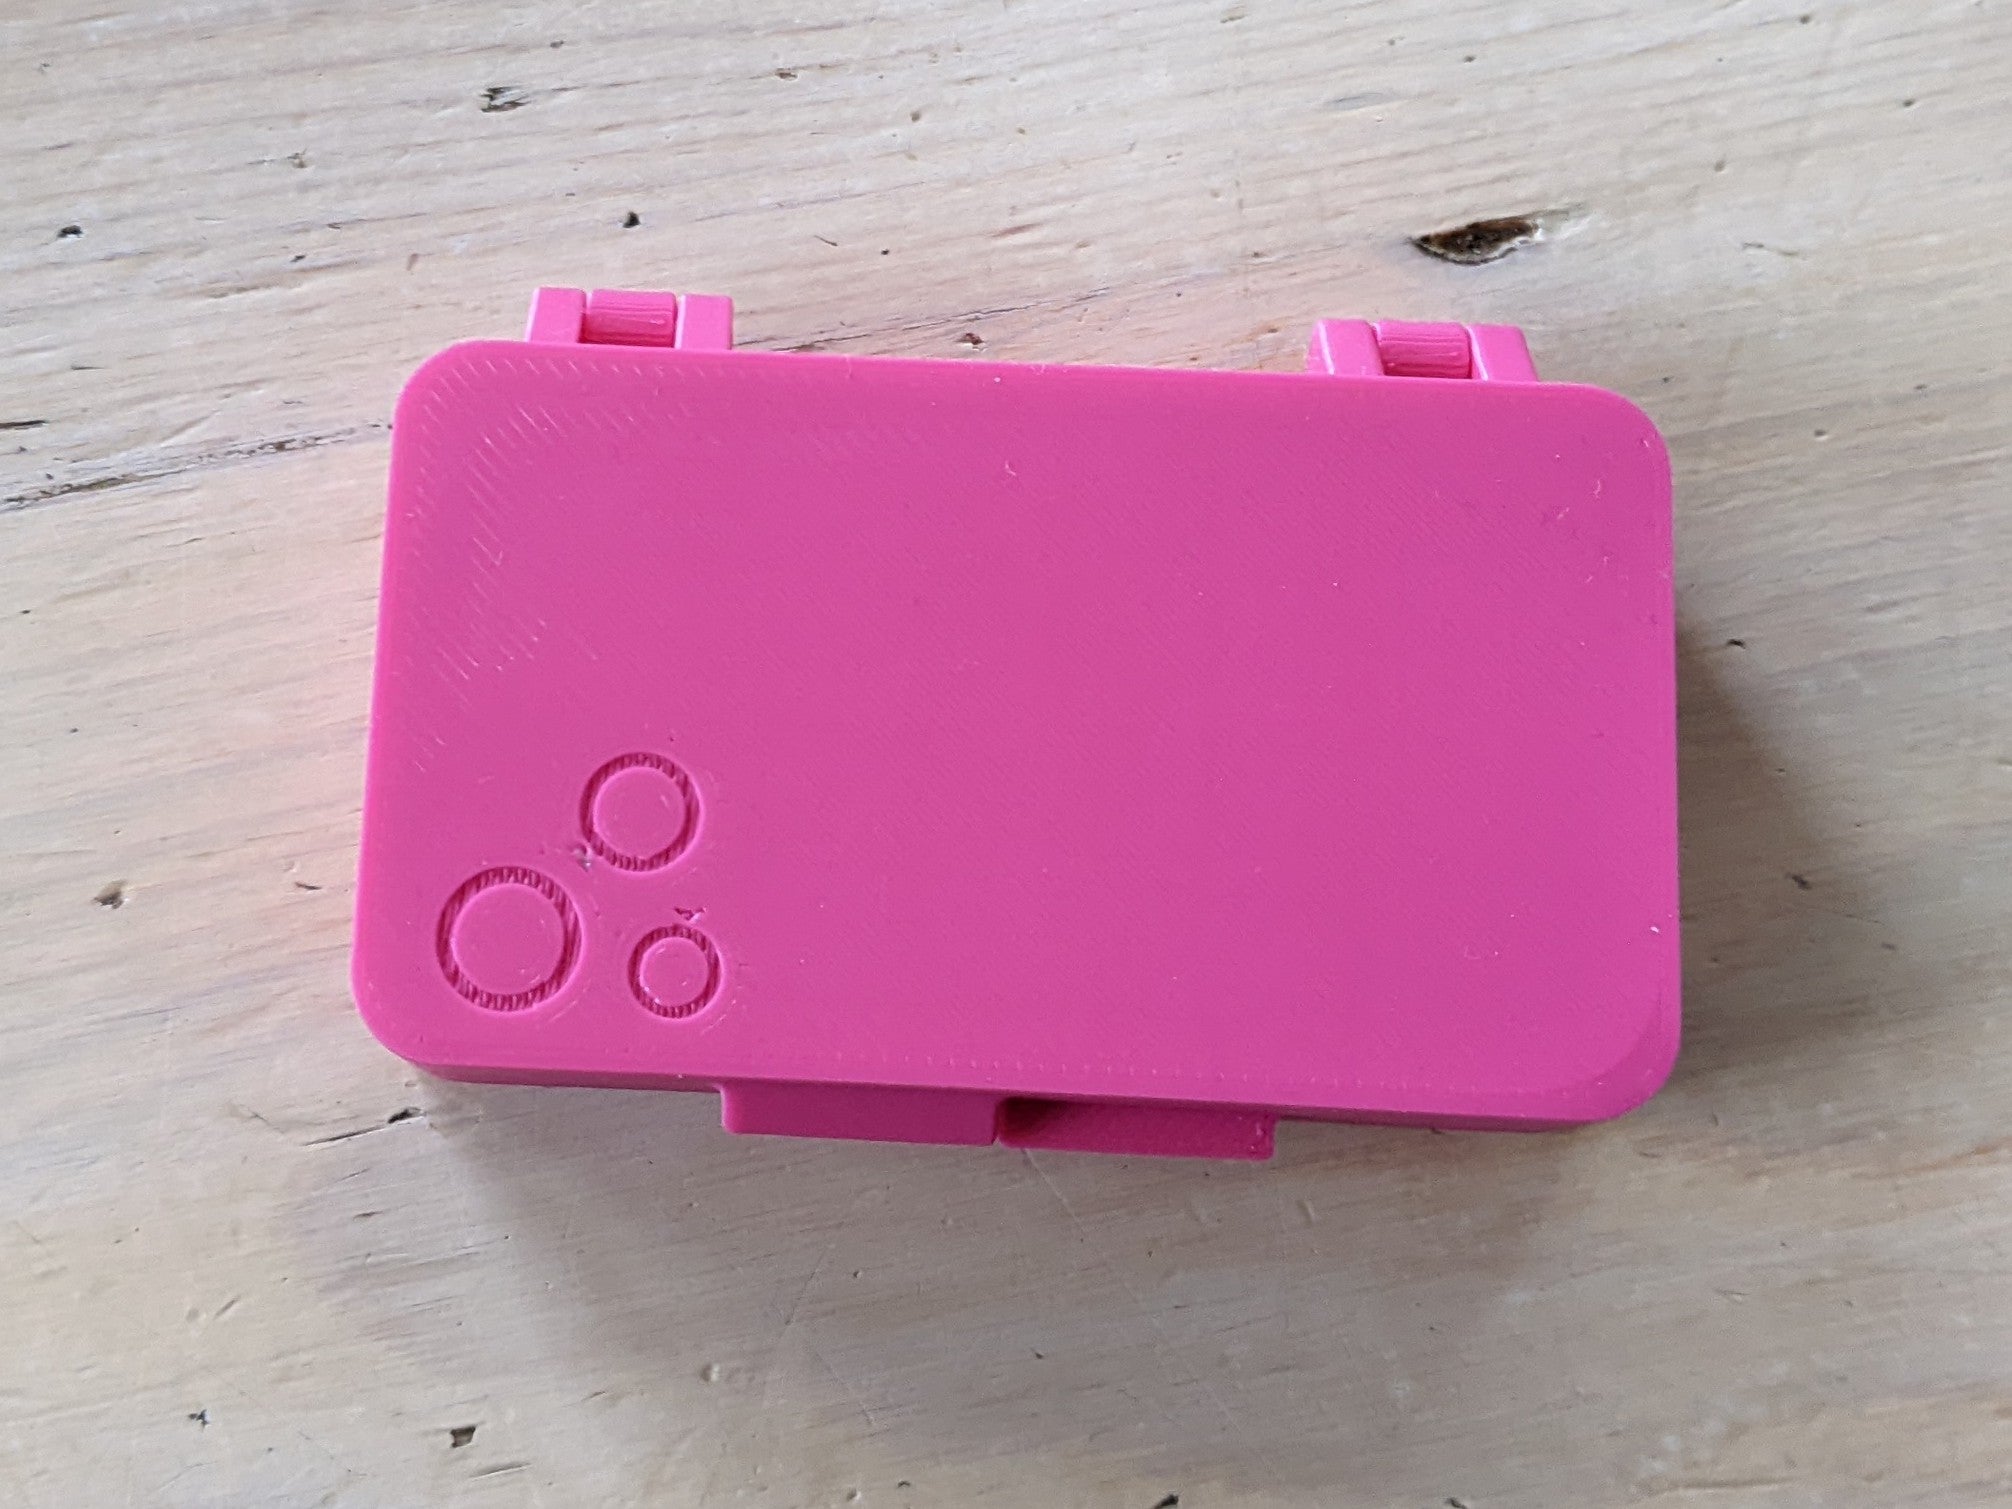 Compact case for knitting marker attachments